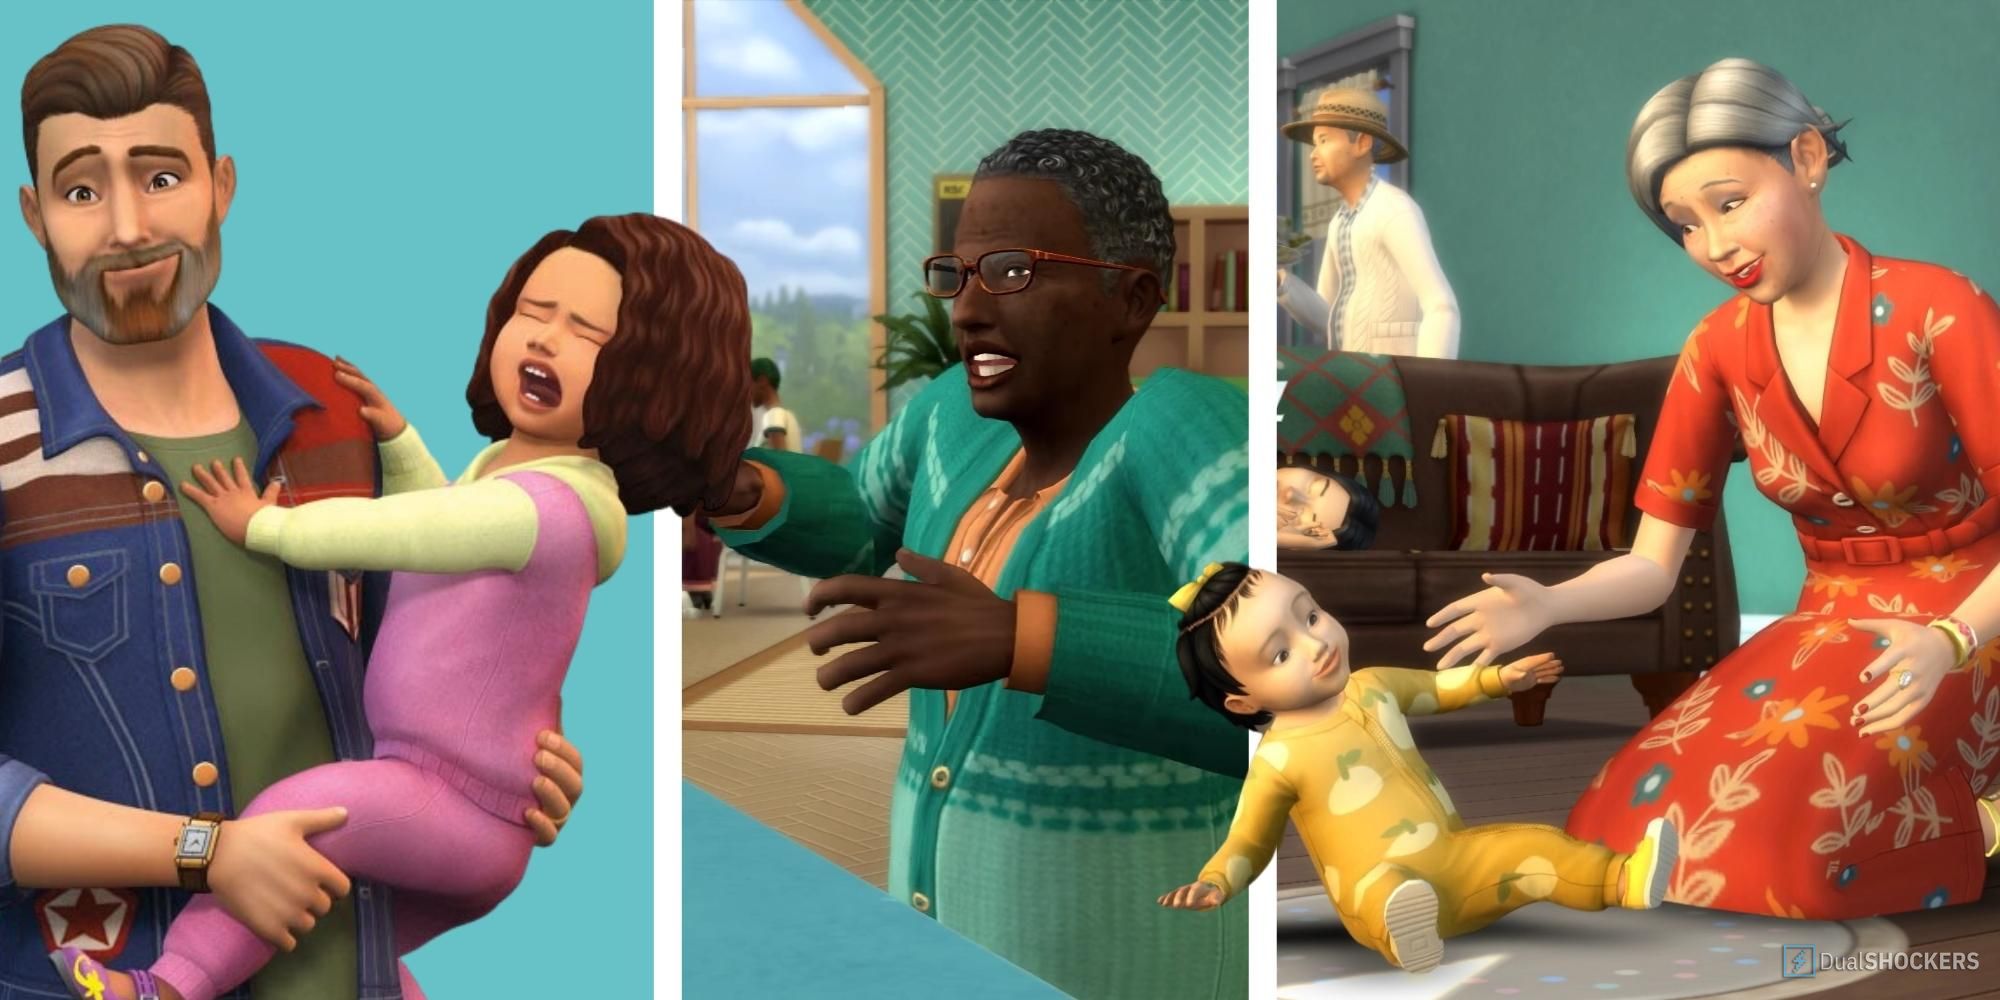 Left to right: A father holding his screaming toddler, an angry elder, an elder playing with an infant